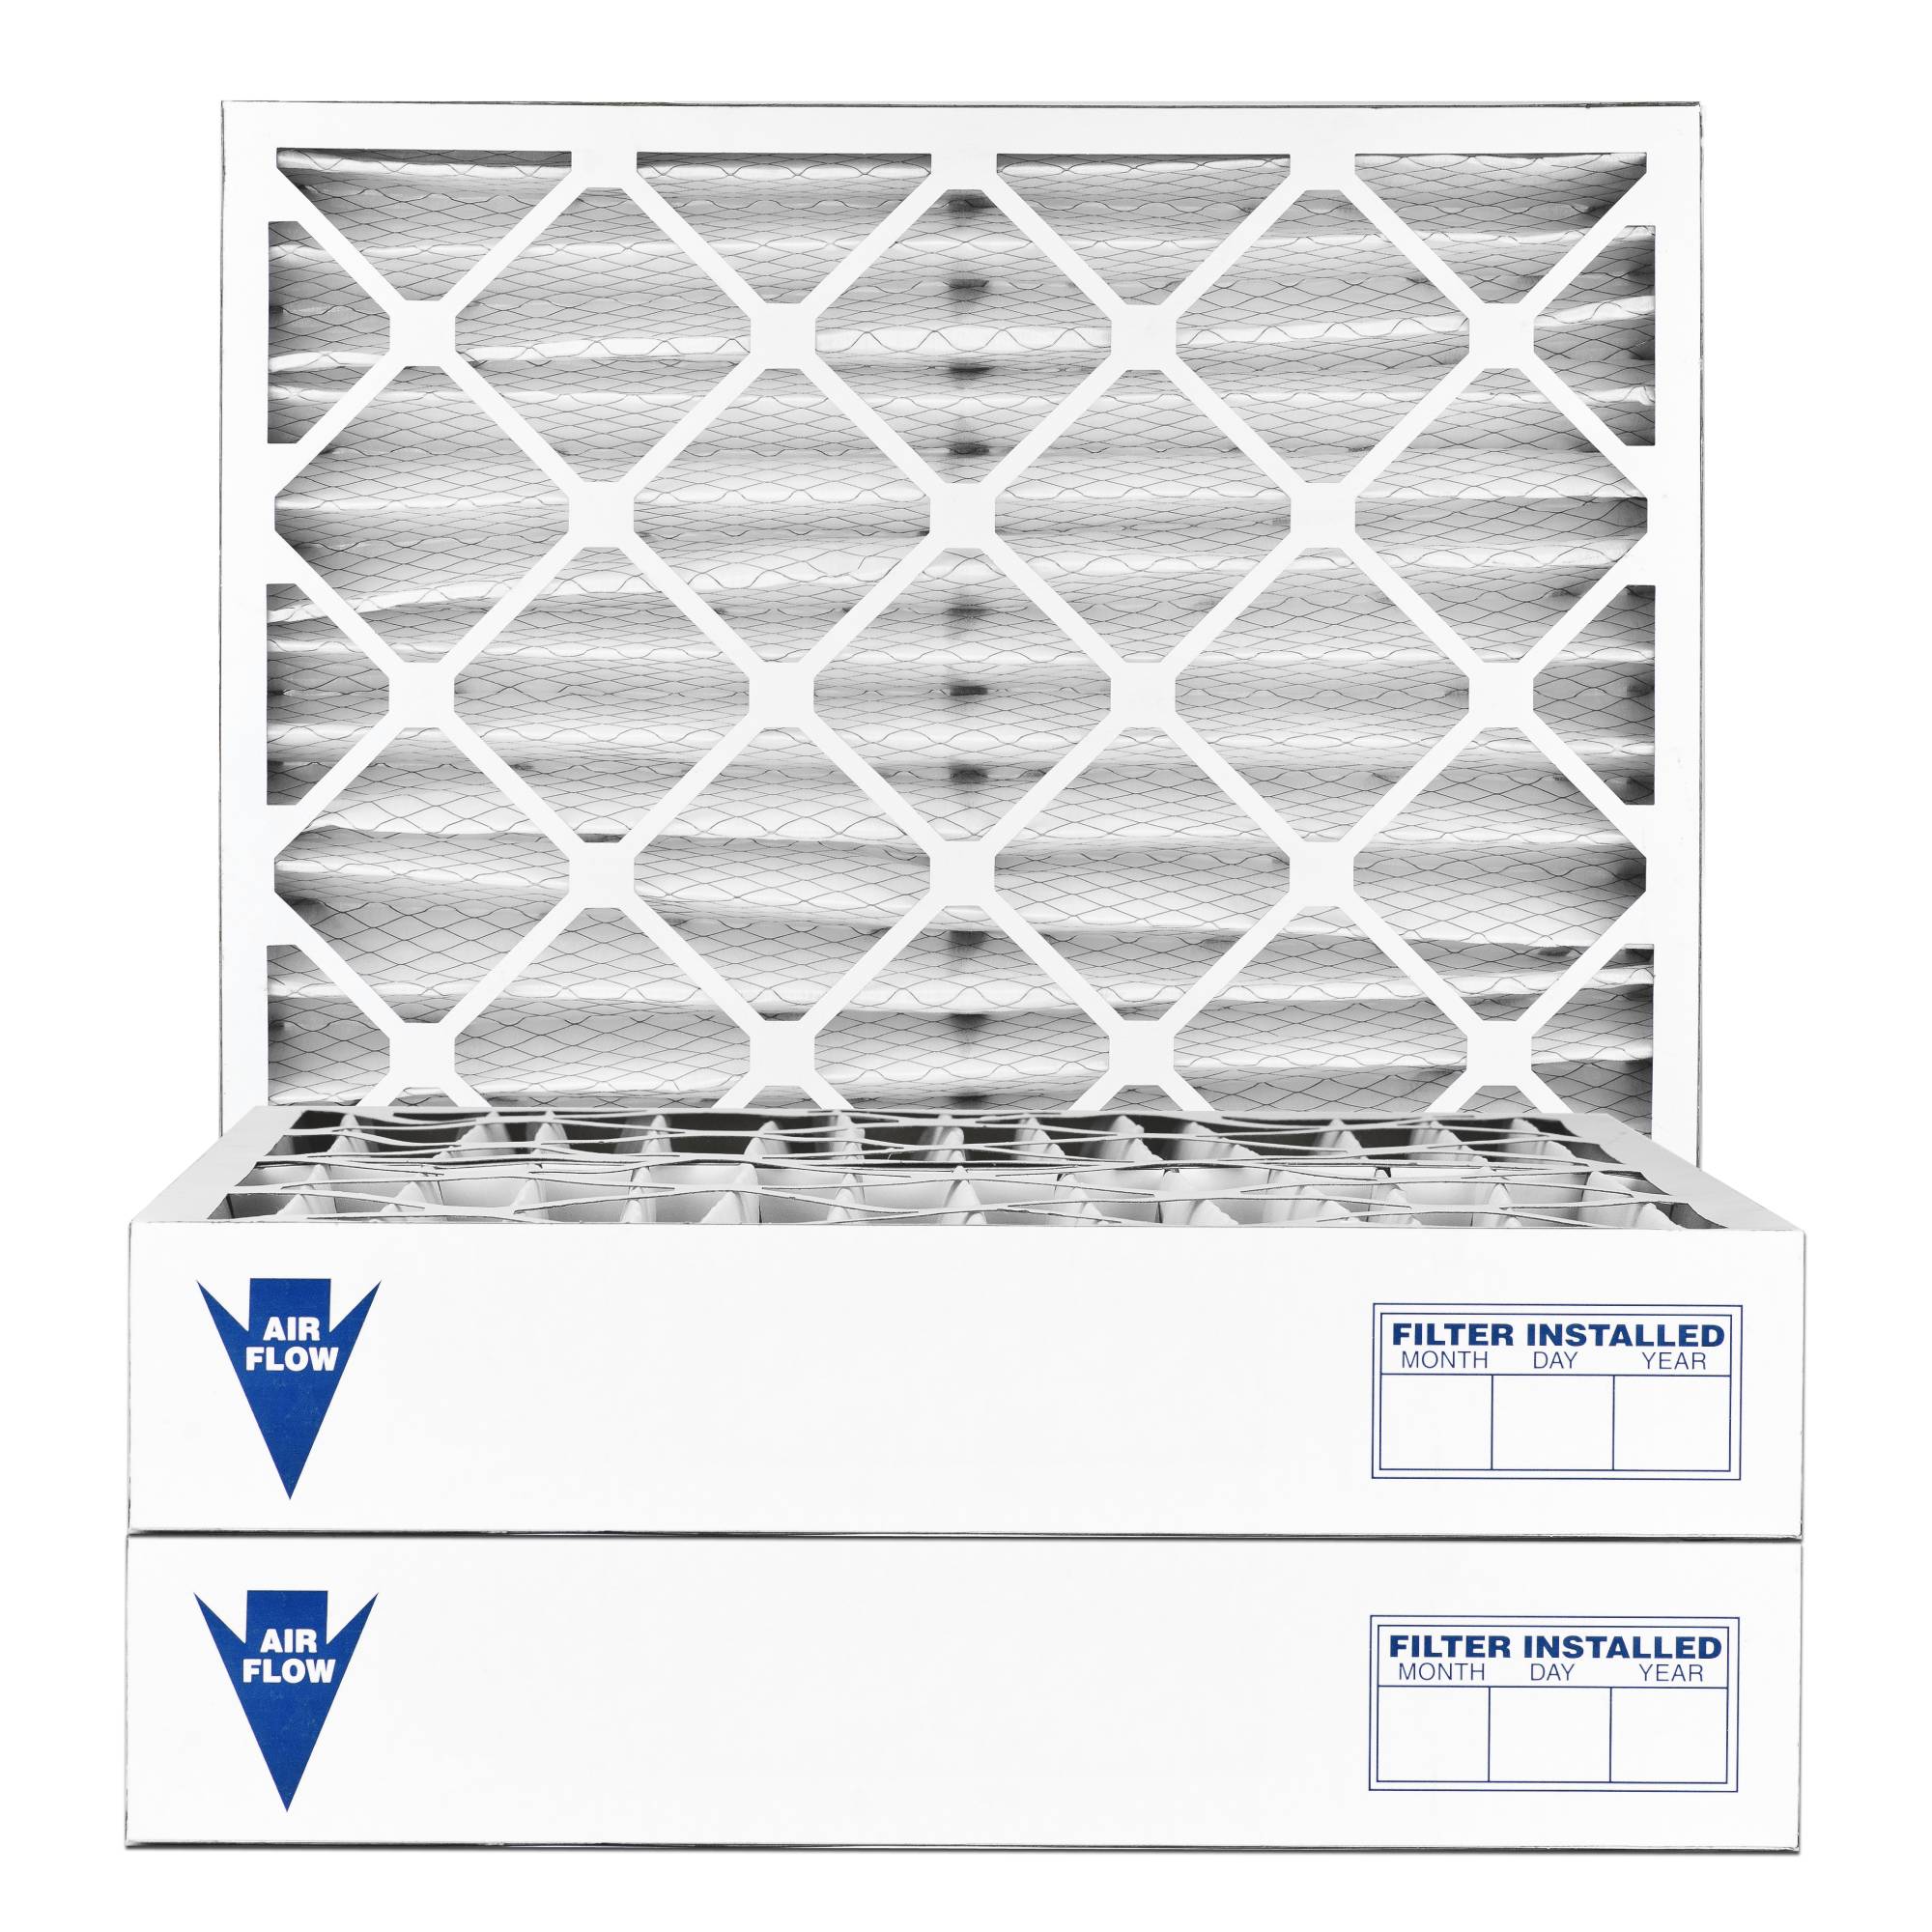 4" MERV 8 Furnace & AC Air Filter by Filters Fast&reg; - 3-Pack